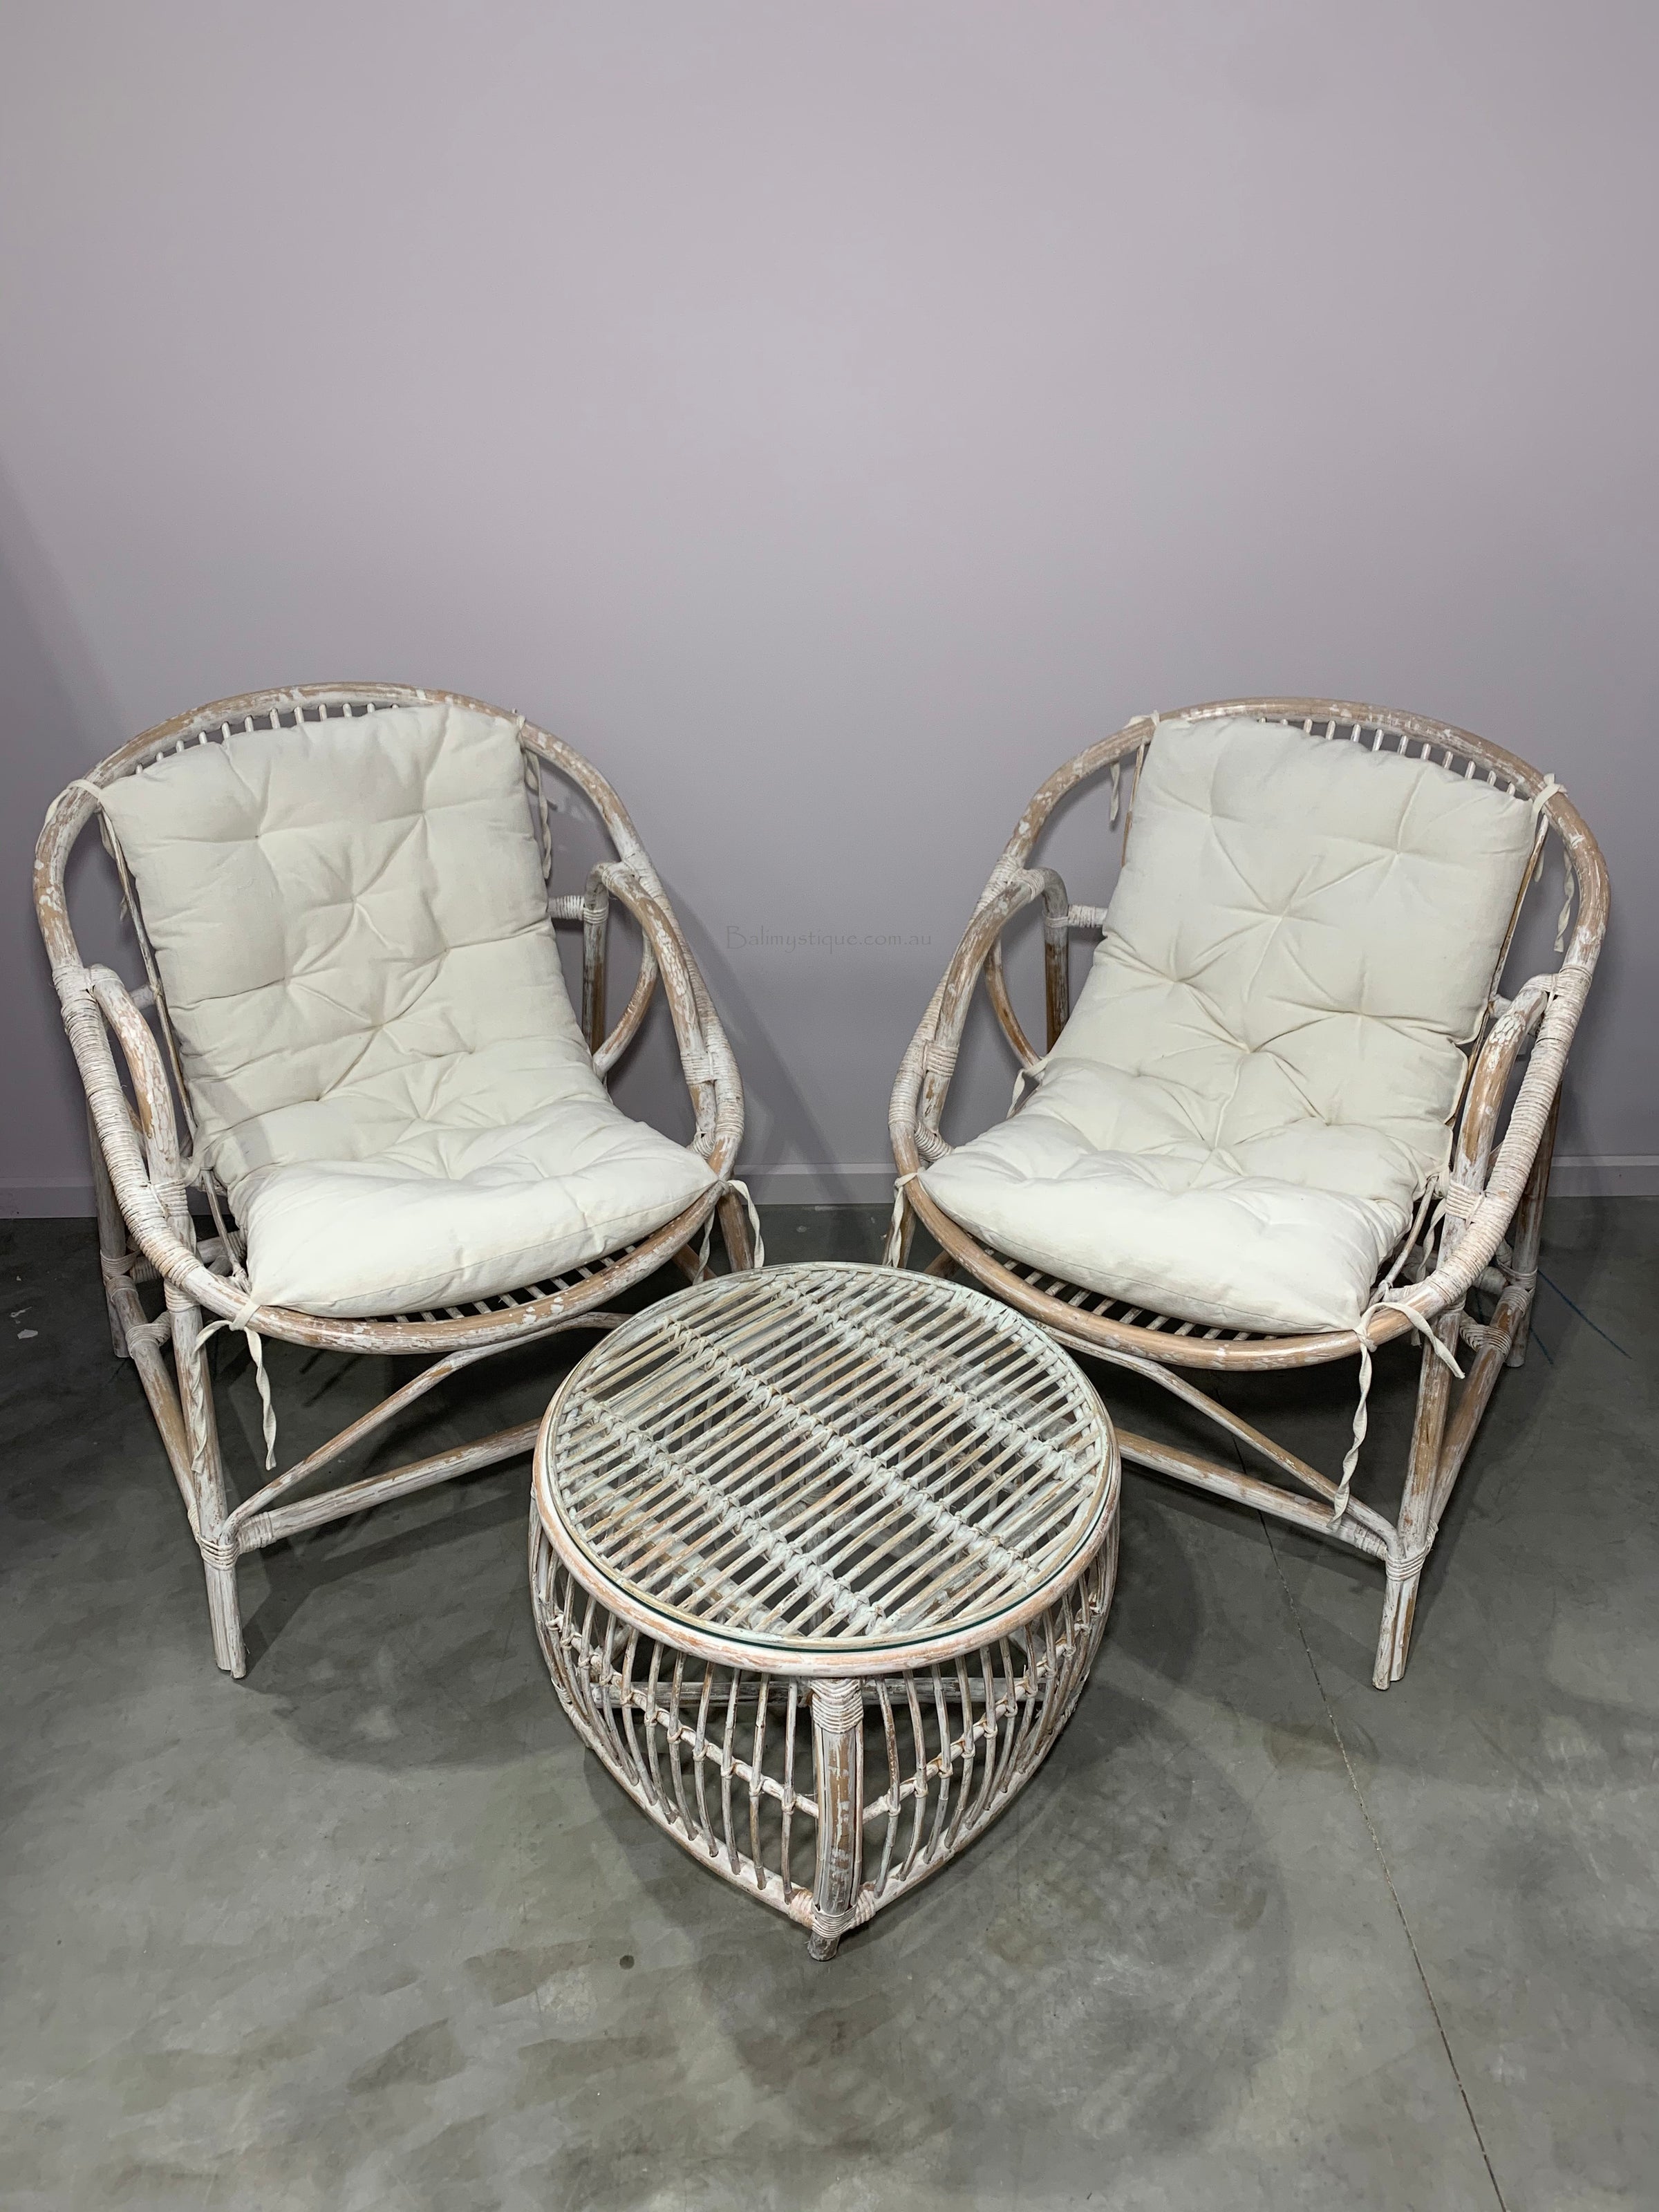 Rattan Two Seater Patio Setting with Cushions